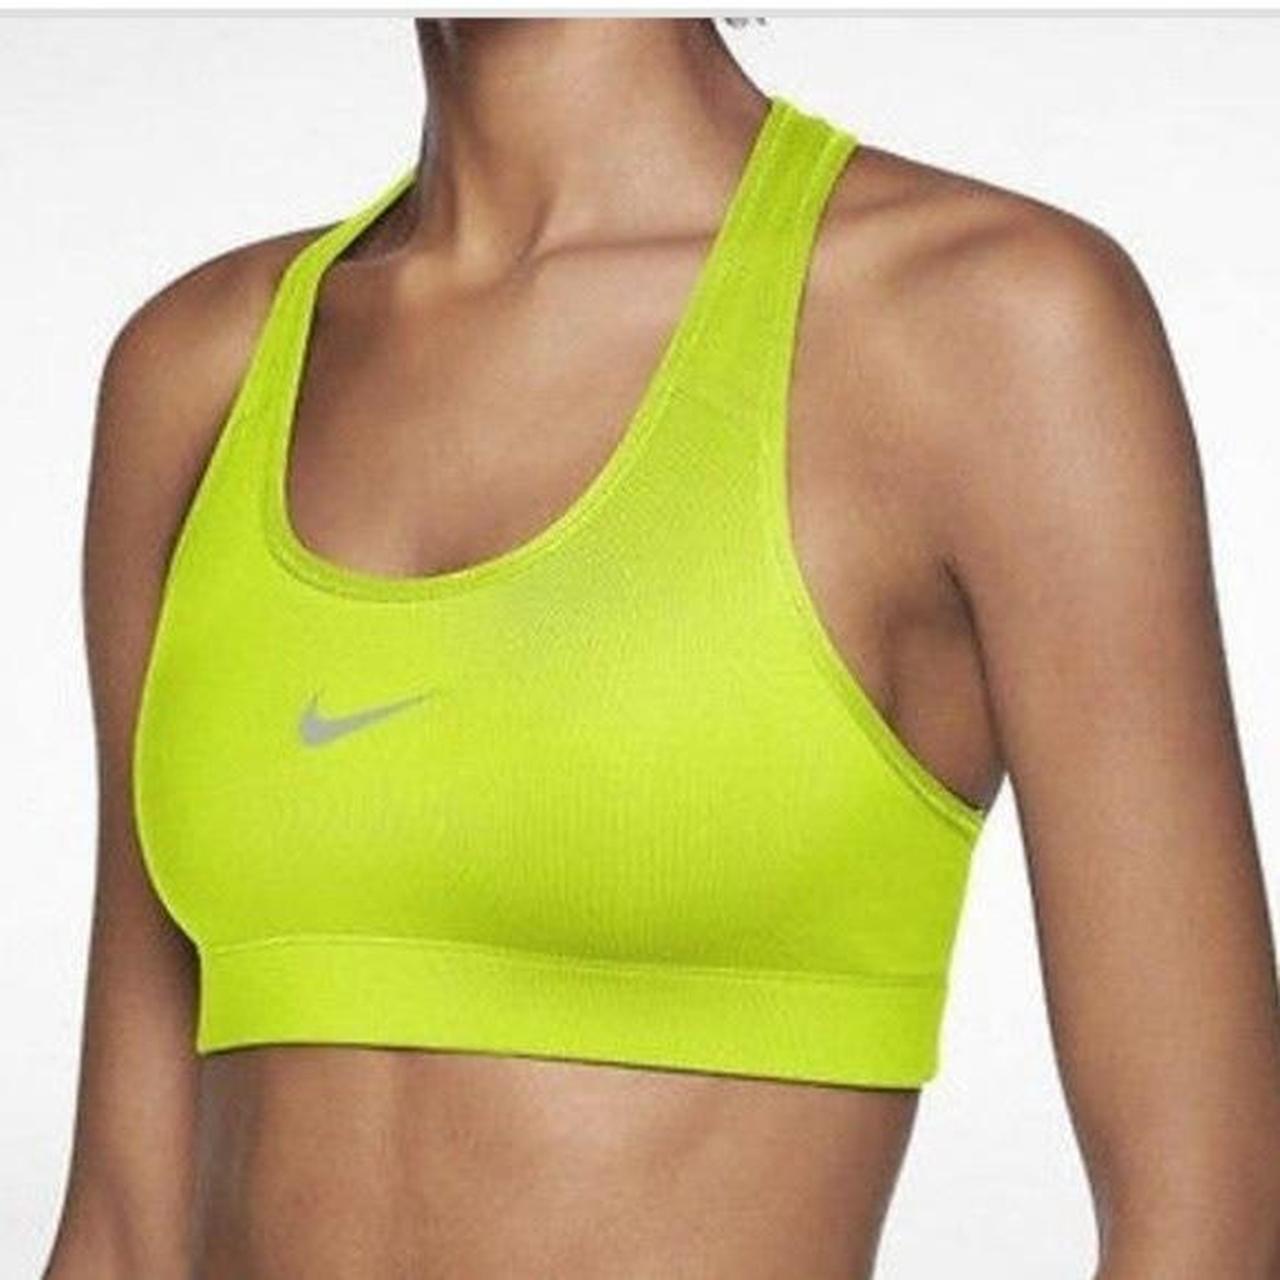 Nike sports bra neon yellow great for running or - Depop